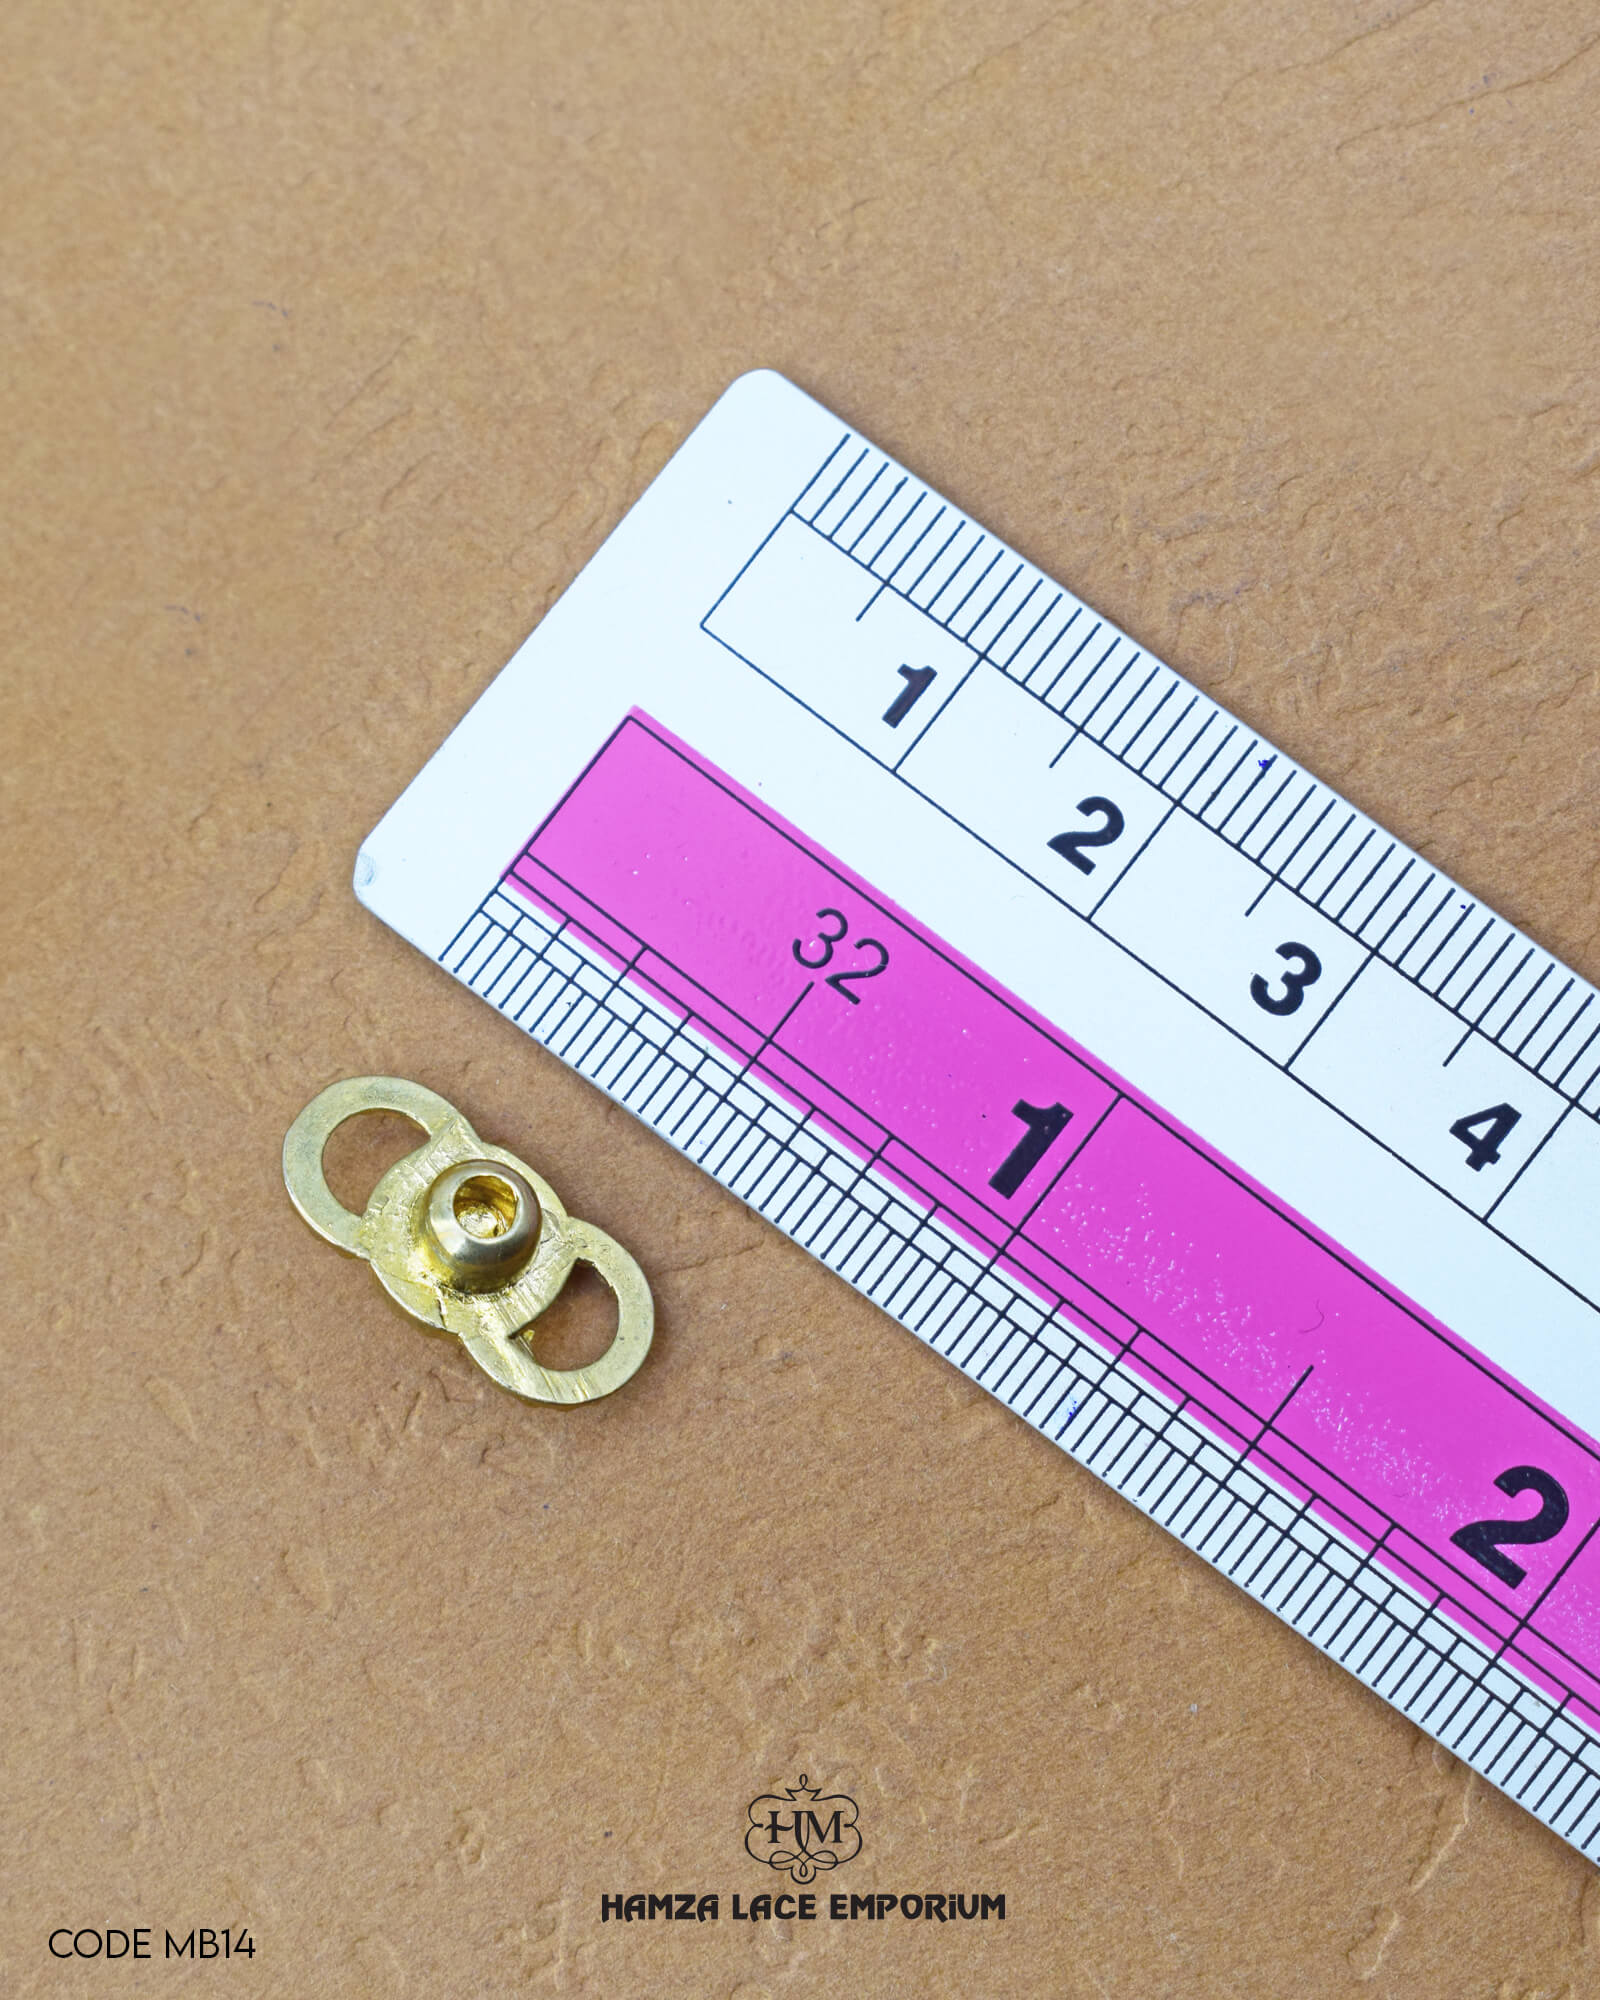 The dimensions of the 'Golden Metal Button With Stone MB14' are determined using a ruler.